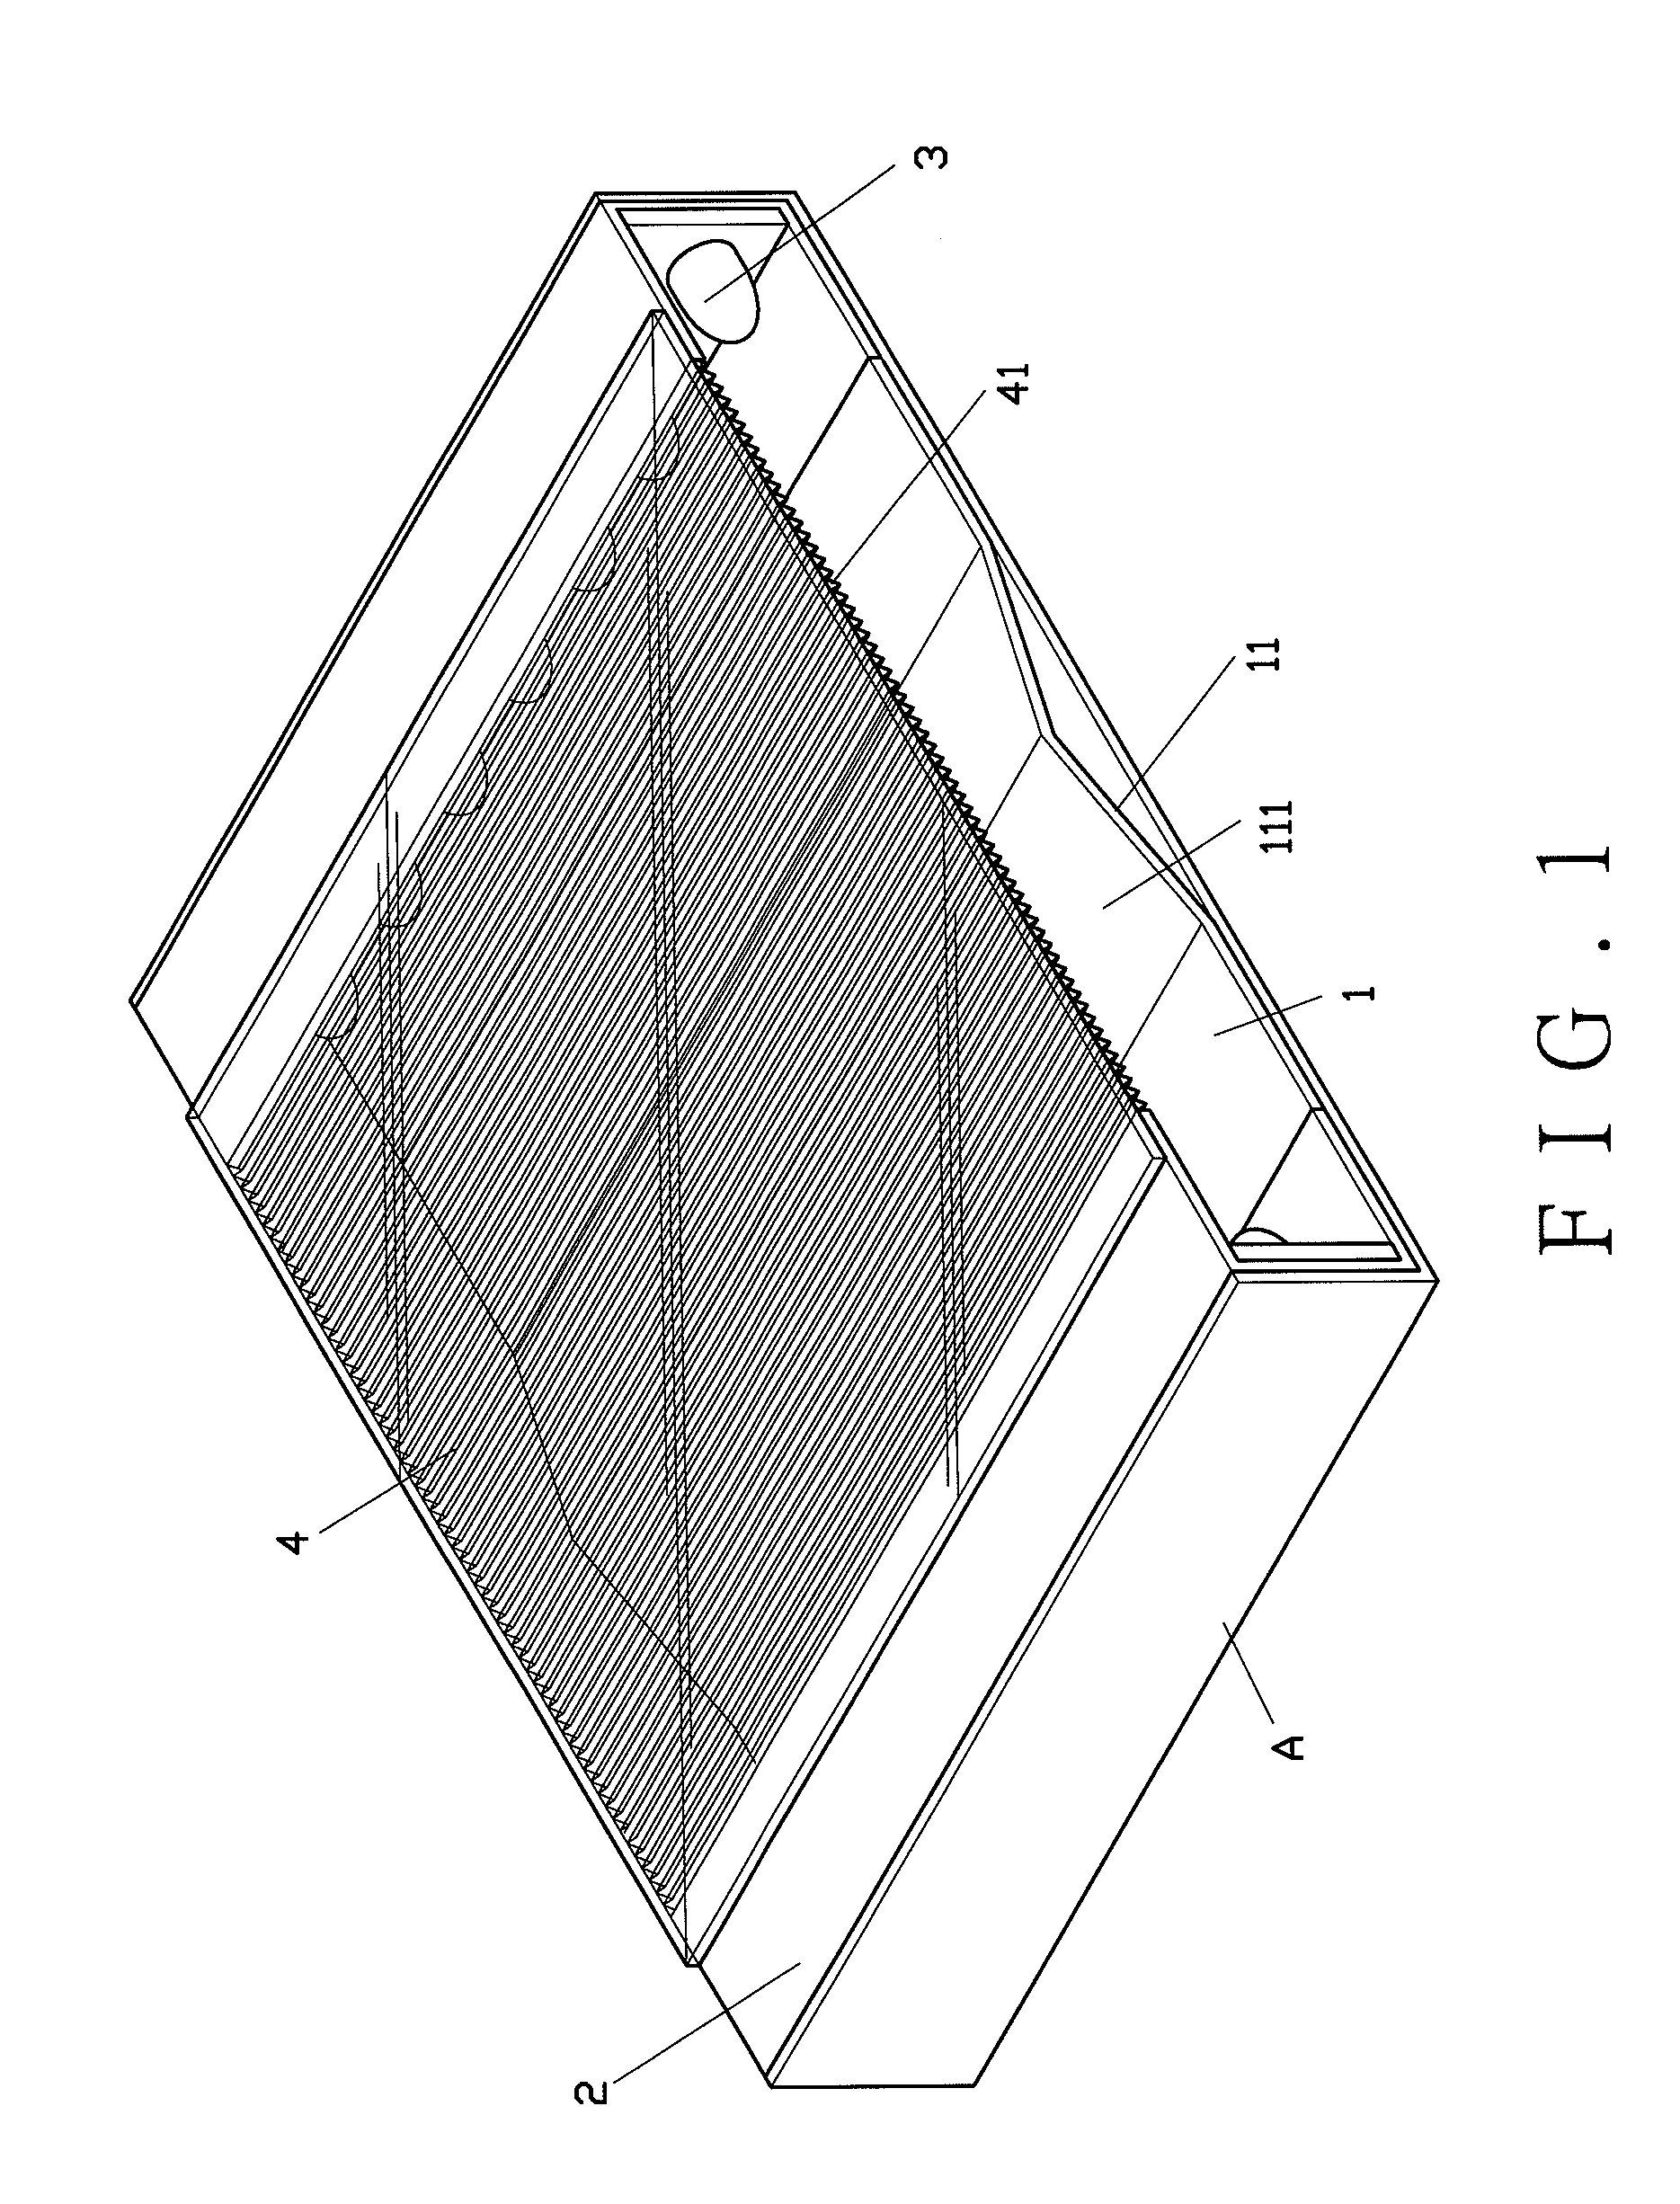 Radiation structure without light guiding board